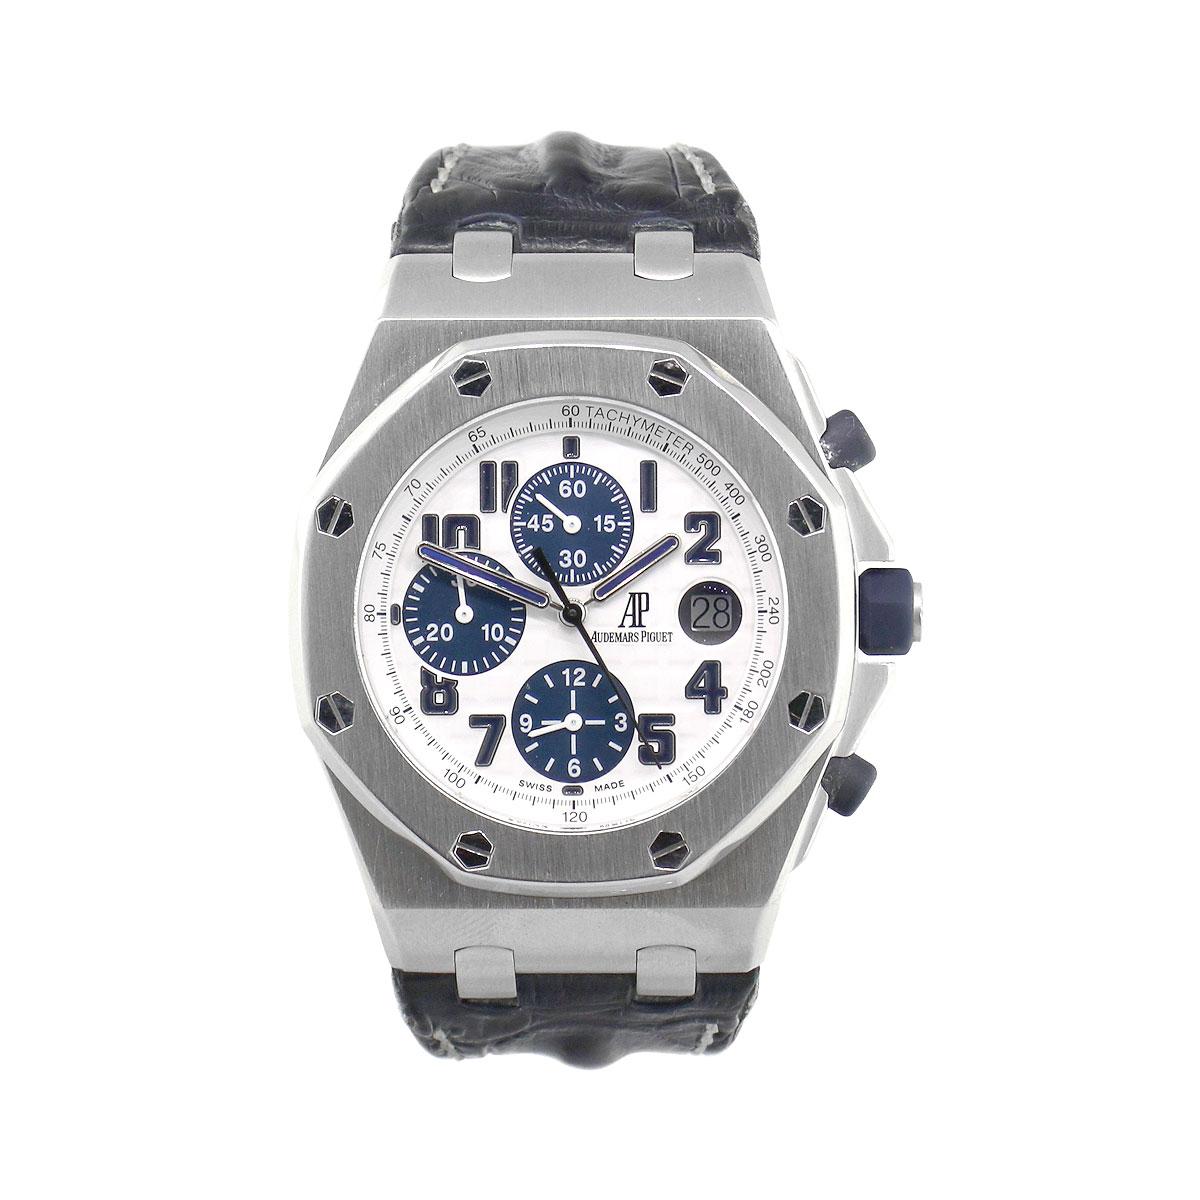 Brand: Audemars Piguet
Model: Royal Oak Offshore
Case Material: Stainless Steel
Case Diameter: 42mm
Crystal: Sapphire
Bezel: stainless steel bezel
Dial: White Méga Tapisserie Chronograph Dial with blue sub dials. Date can be found at 3